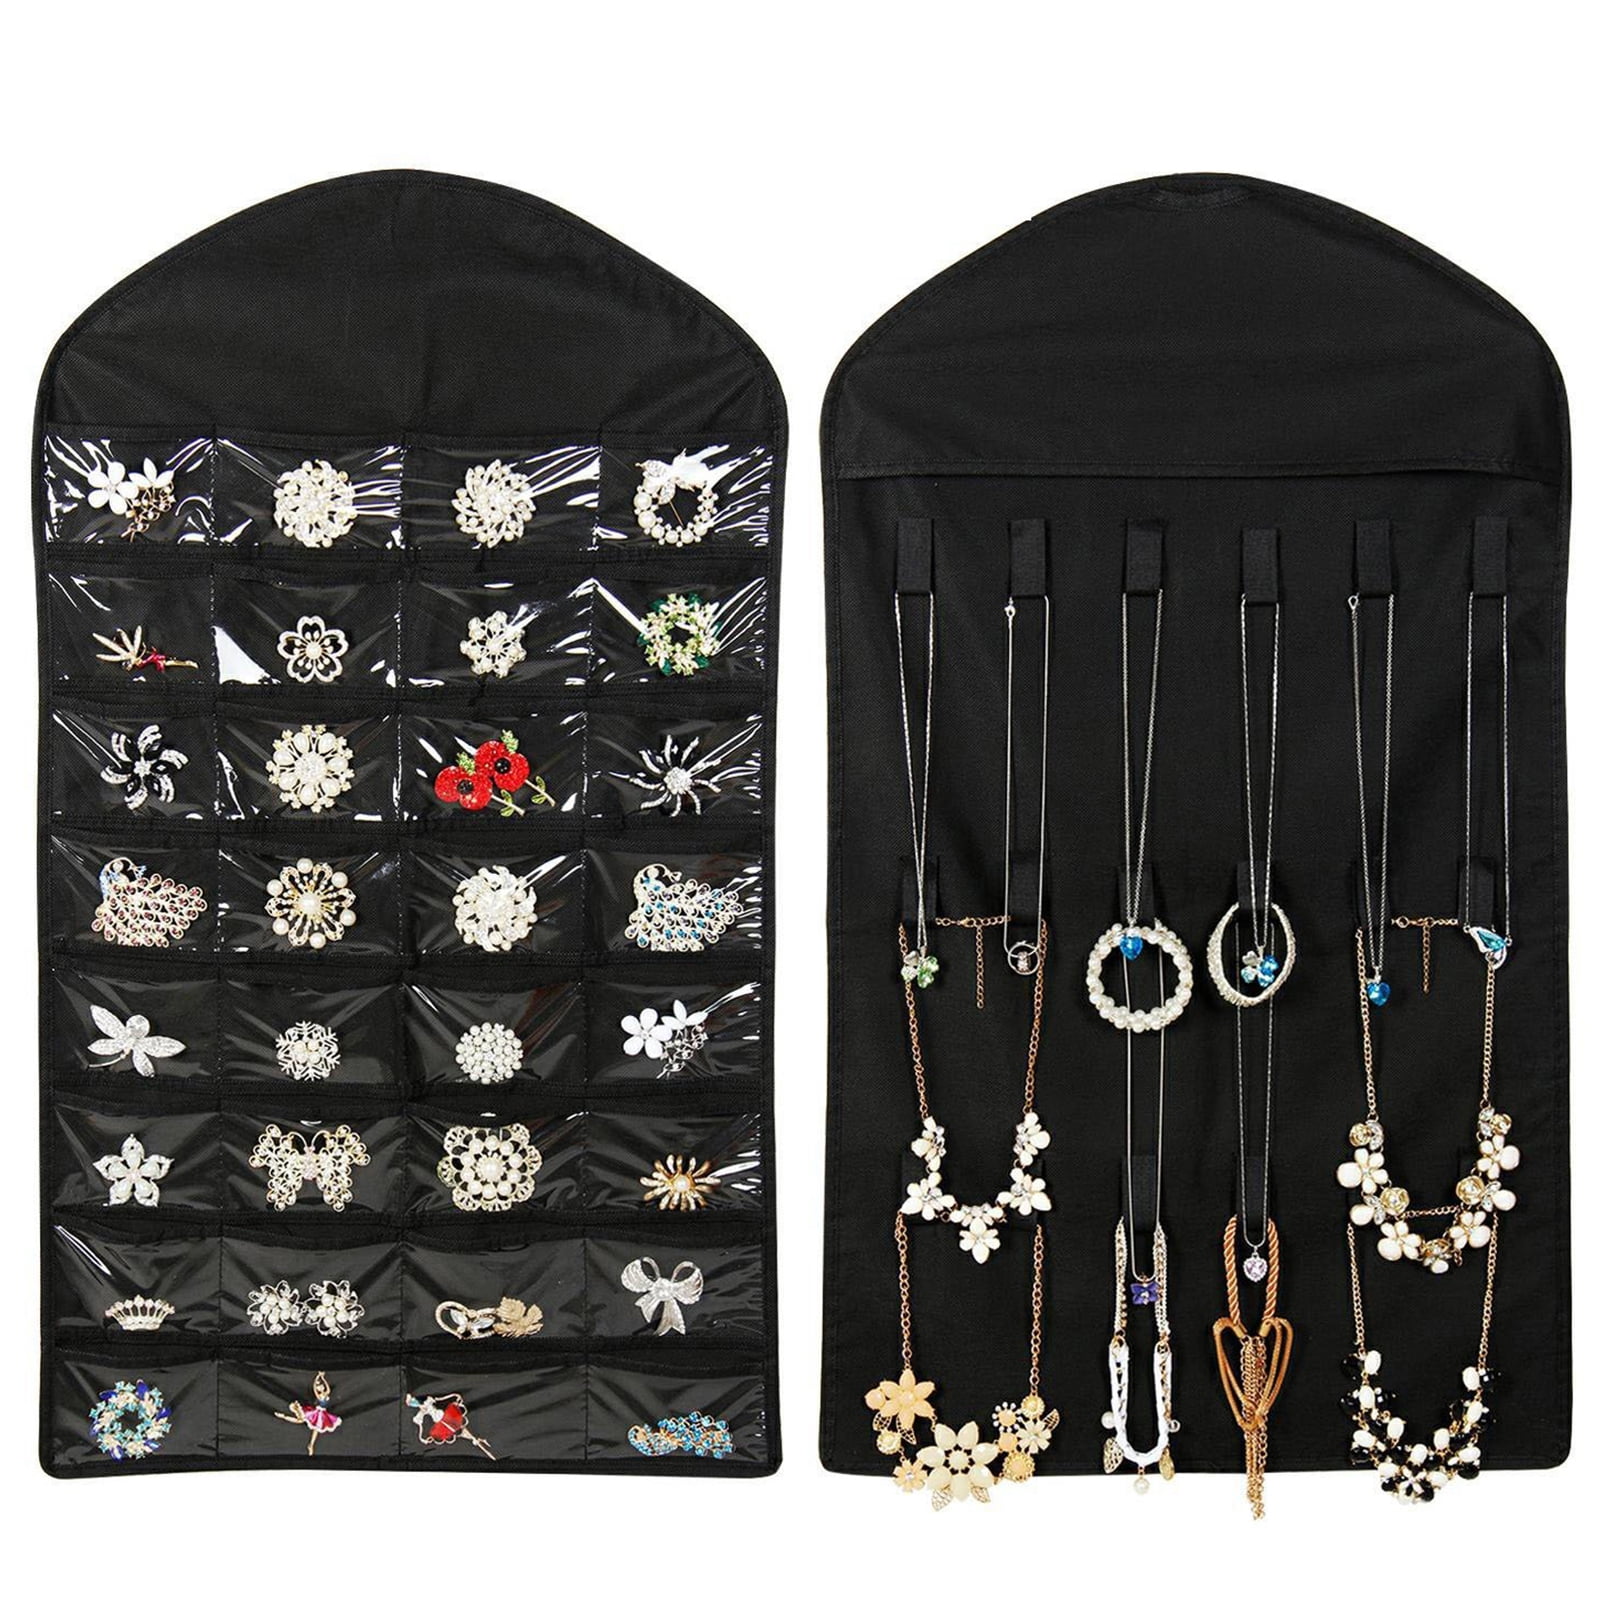 72 POCKET DOUBLE SIDED HANGING ORGANISER HOLDER JEWELLERY CASE ODDS TIDY DISPLAY 